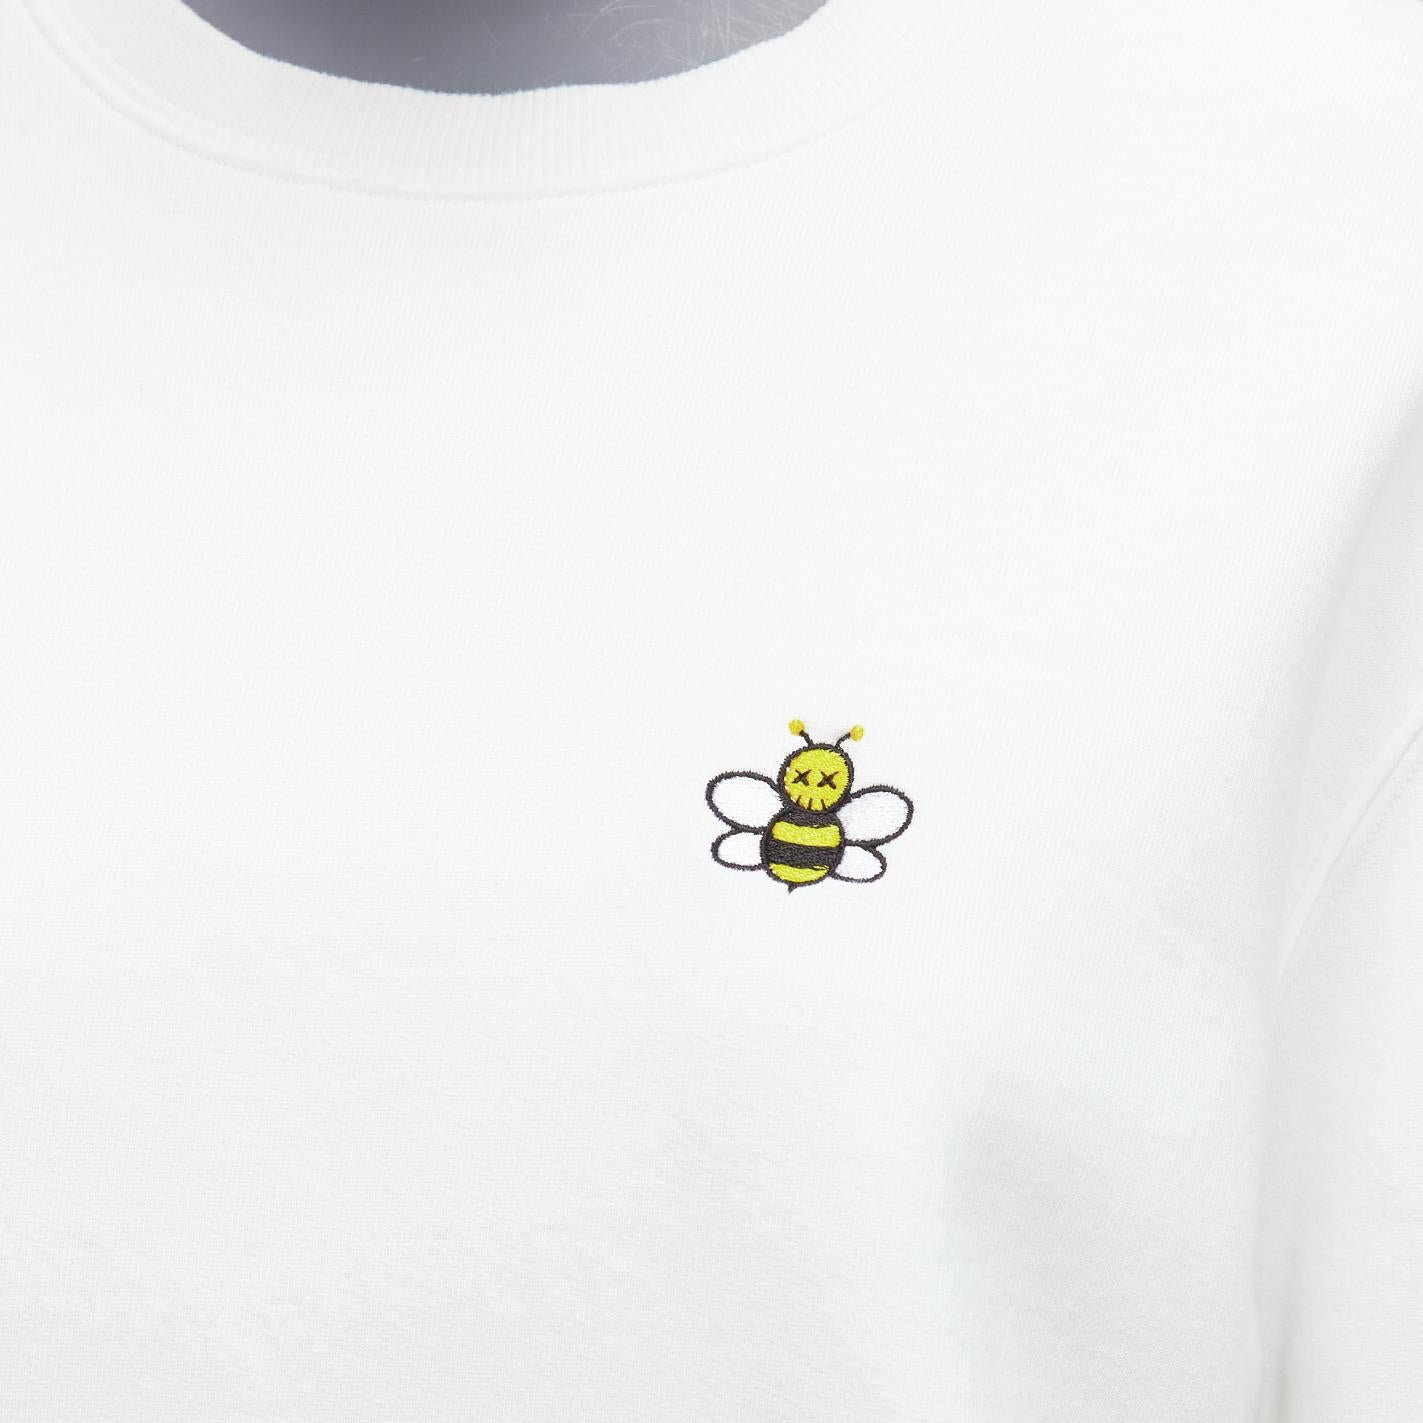 DIOR HOMME Kaws cream yellow cross eye bee embroidery crew sweatshirt L
Reference: YIKK/A00012
Brand: Dior
Collection: Kaws
Material: Cotton
Color: Cream, Yellow
Pattern: Solid
Closure: Pullover
Made in: Italy

CONDITION:
Condition: Very good, this